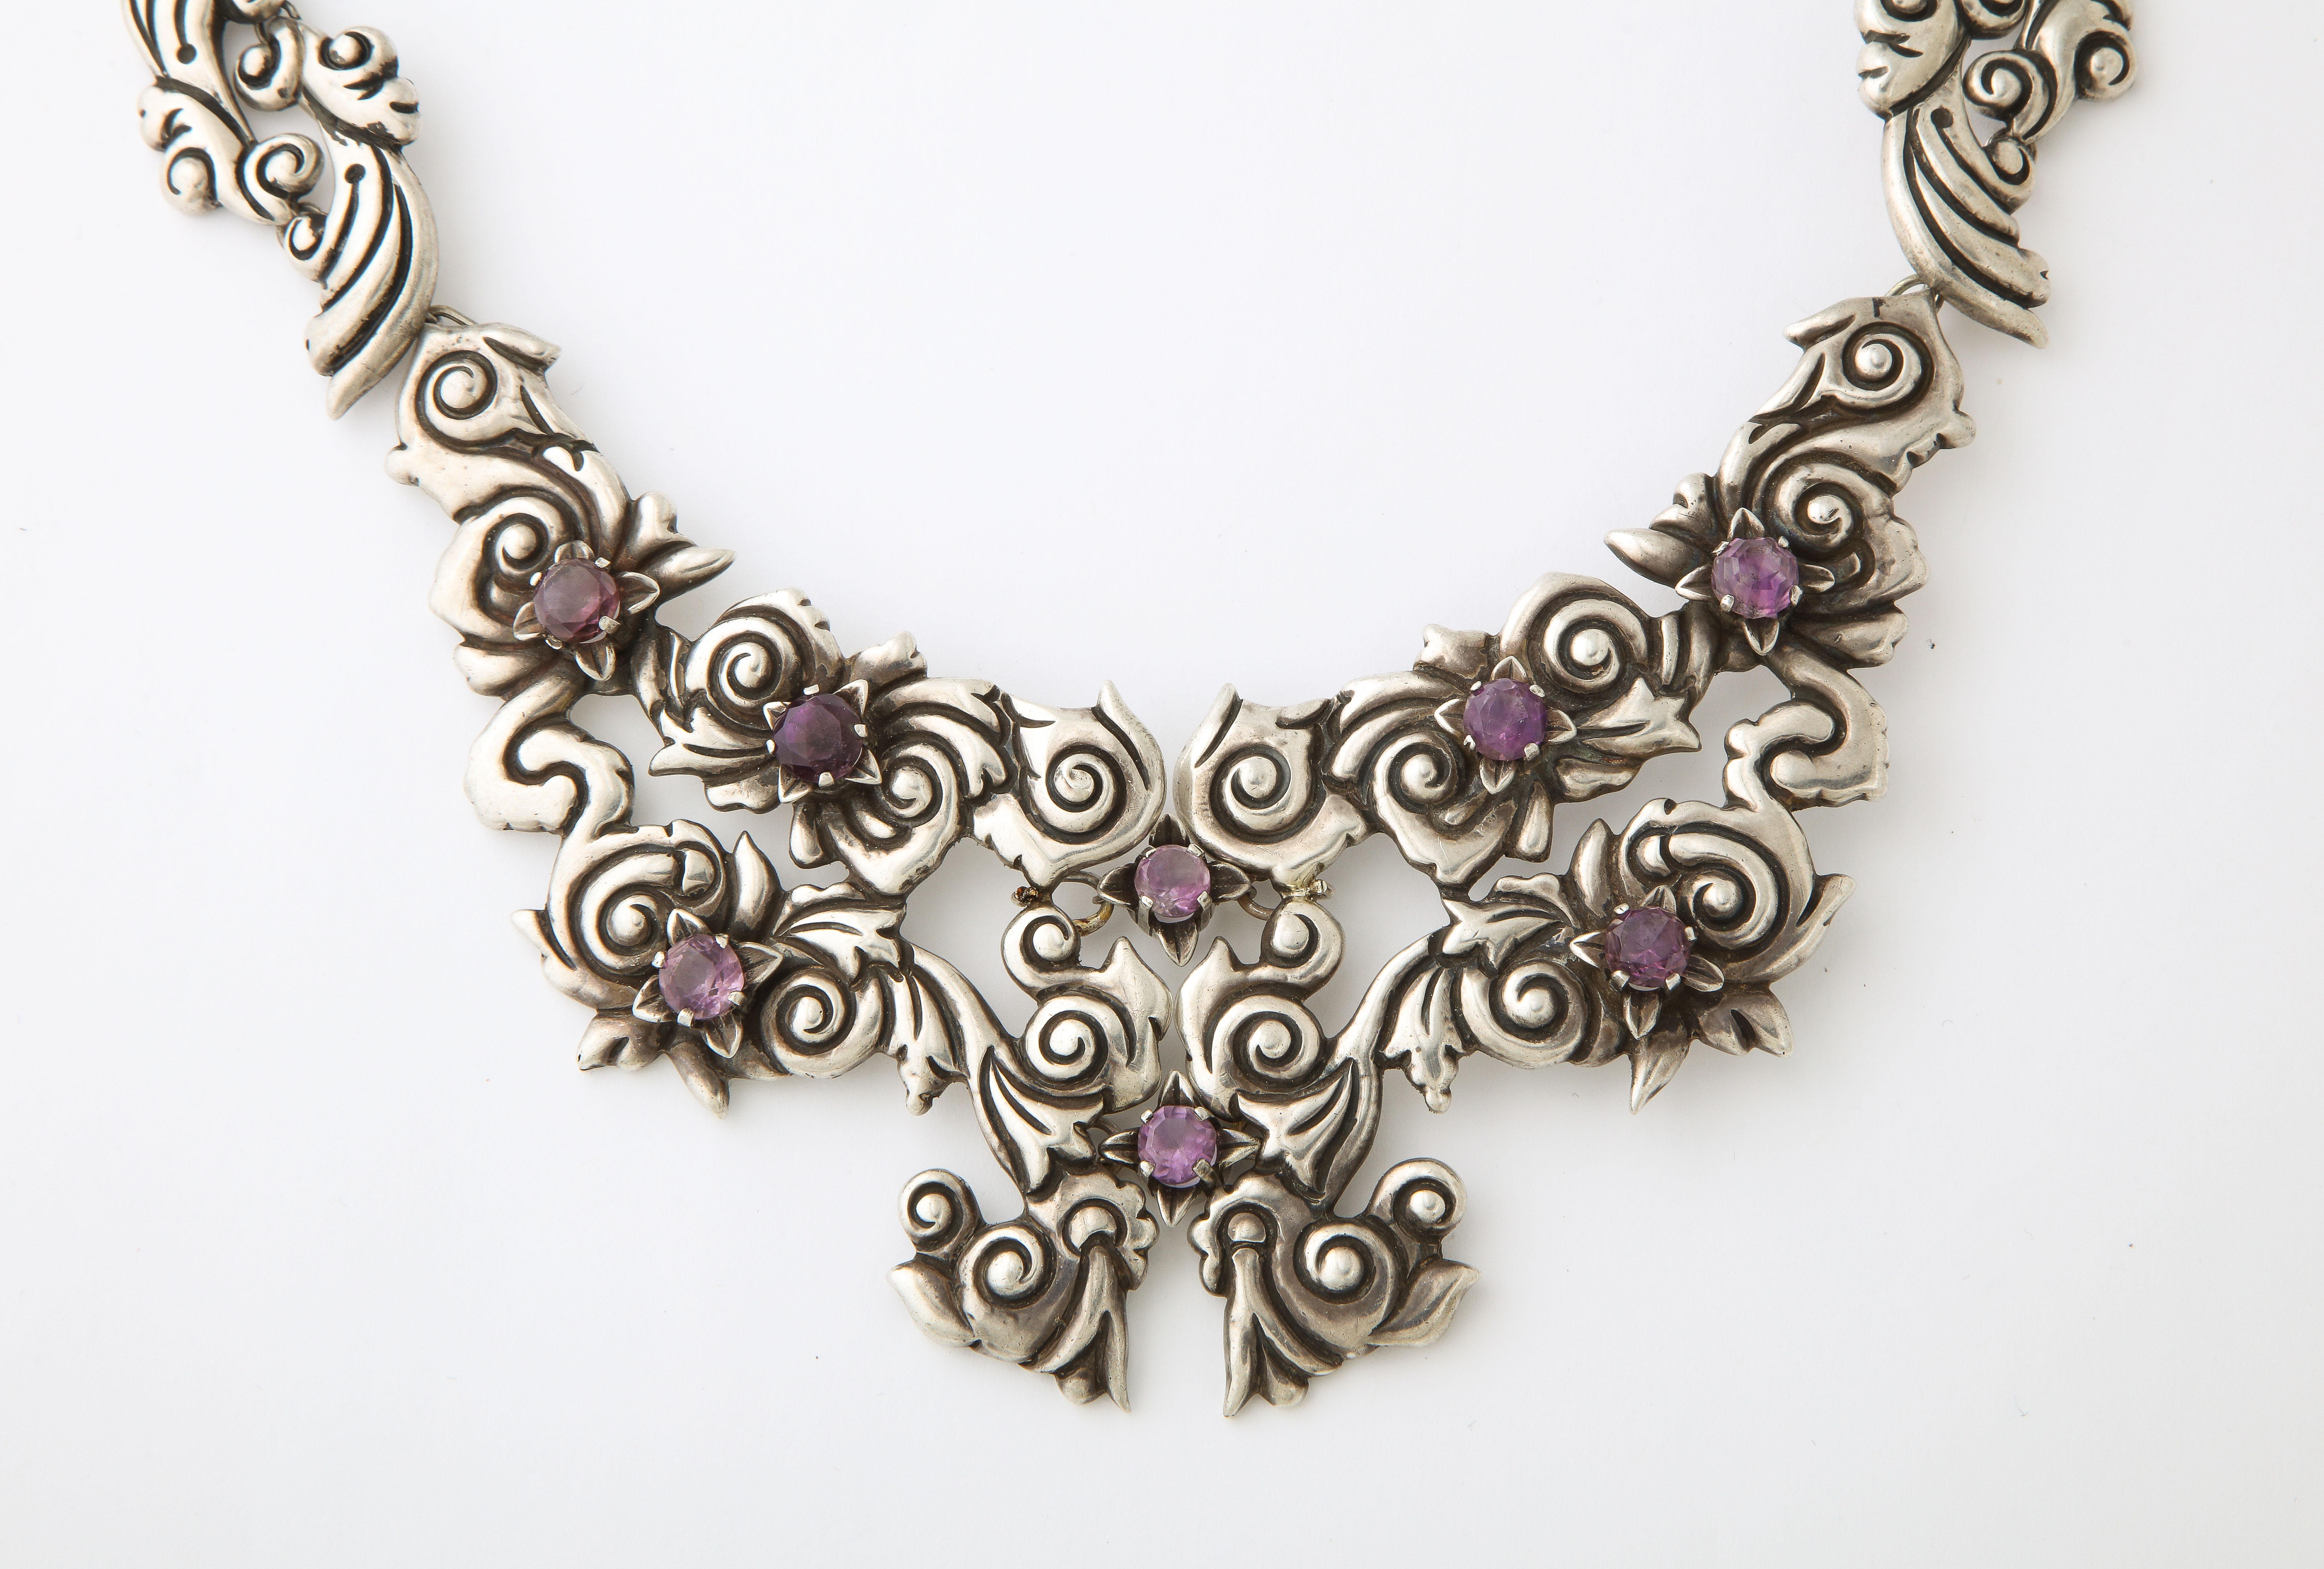 An outstanding example of 1940's Mexican jewelry, this one off silver and amethyst necklace was made for a silver jewelry competition and is attributed to Margot. A letter in my file from Penny Morrill, author and researcher of Mexican jewelry, says